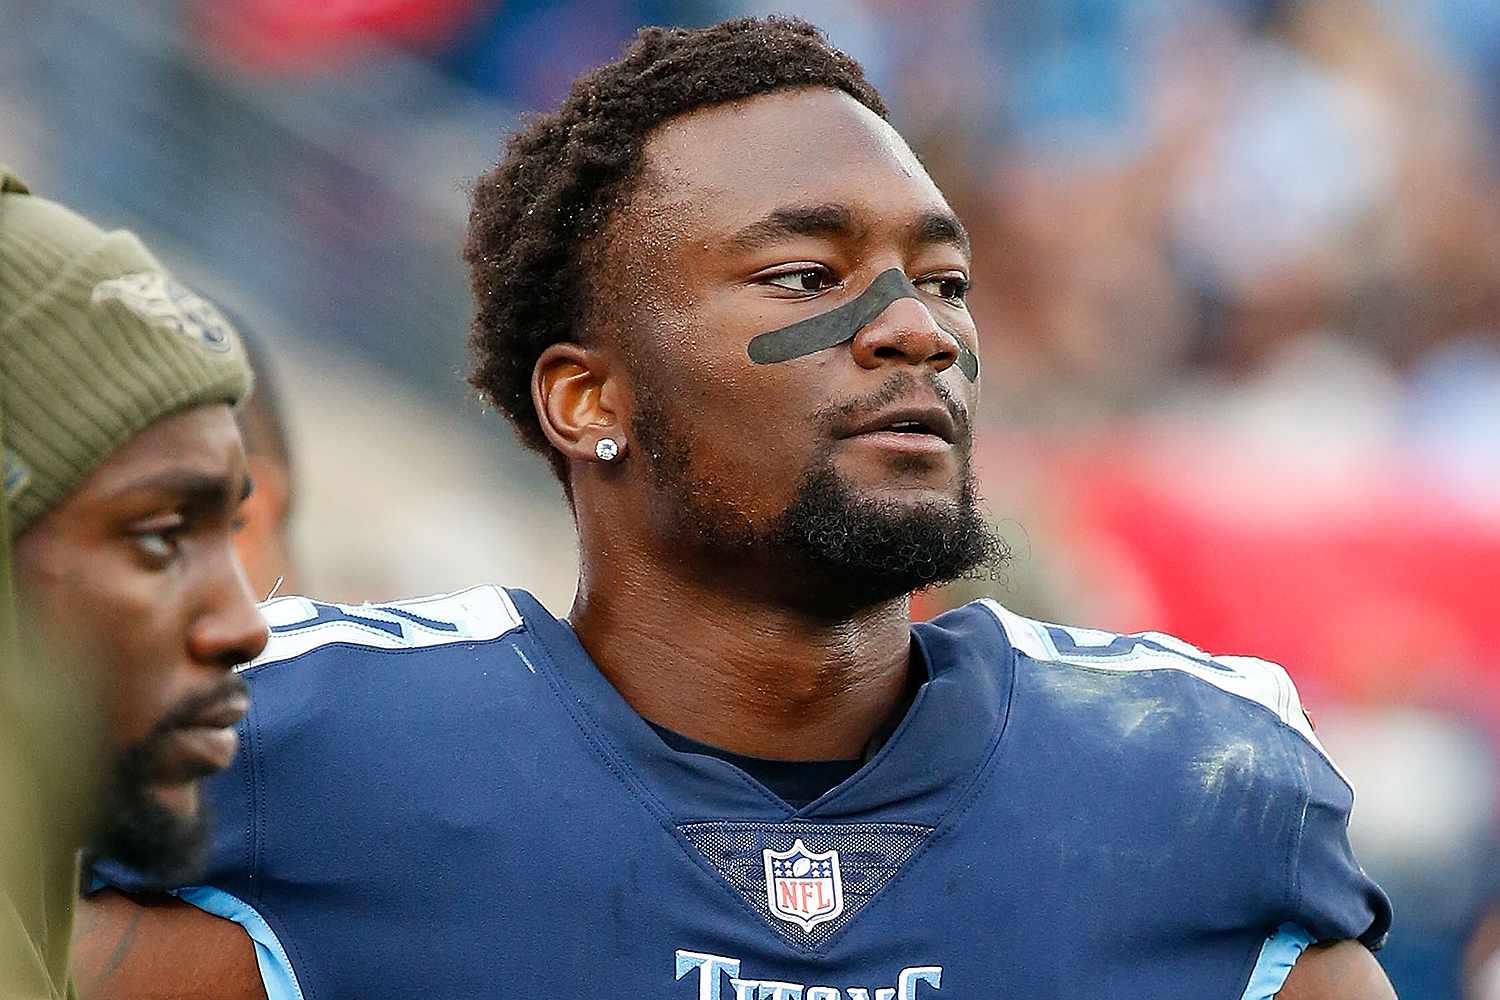 NFL's Corey Davis Emotional in Game After Brother's Death | PEOPLE.com